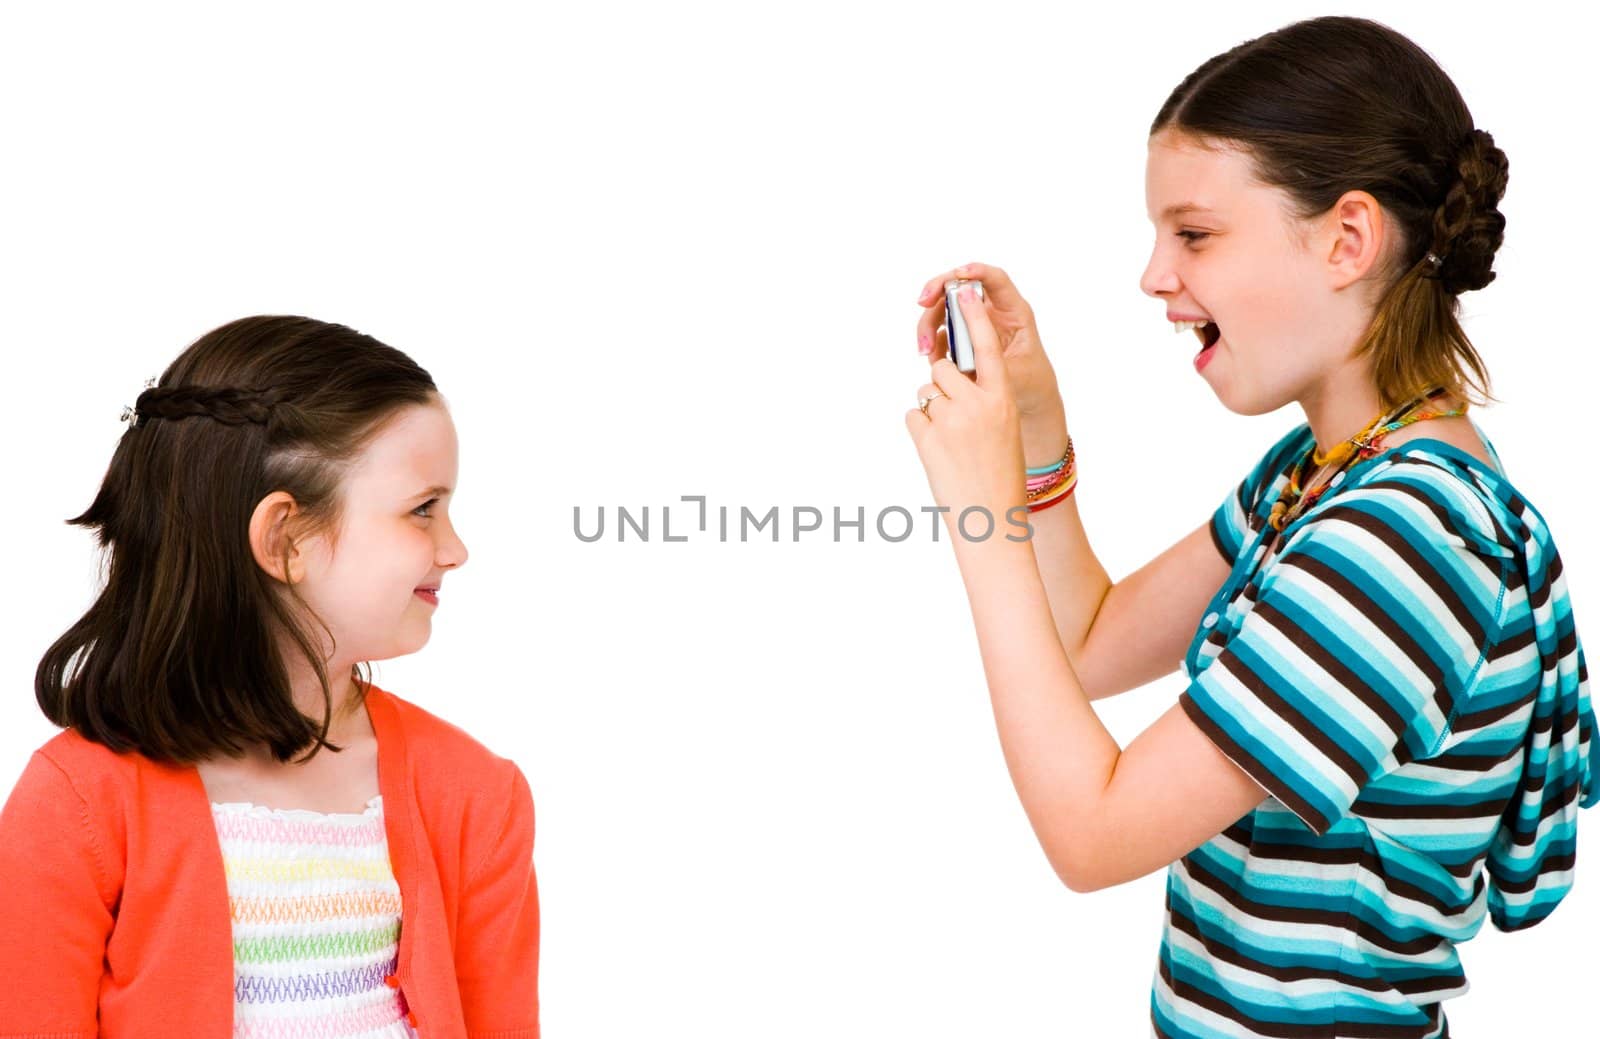 Girl taking picture of her sister with a camera isolated over white